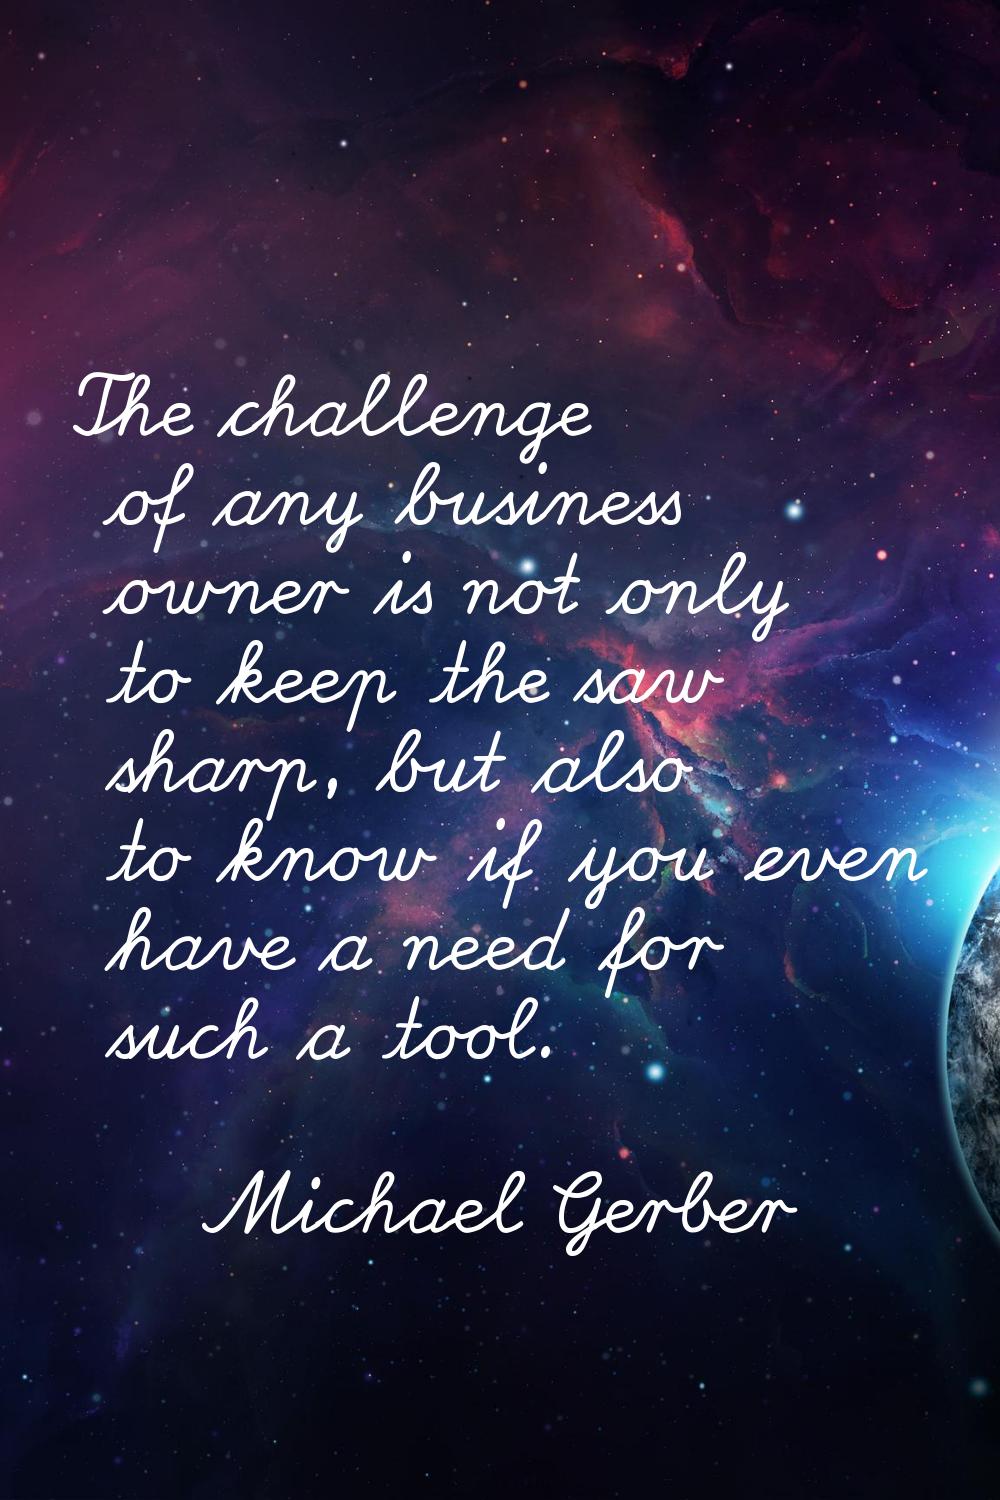 The challenge of any business owner is not only to keep the saw sharp, but also to know if you even